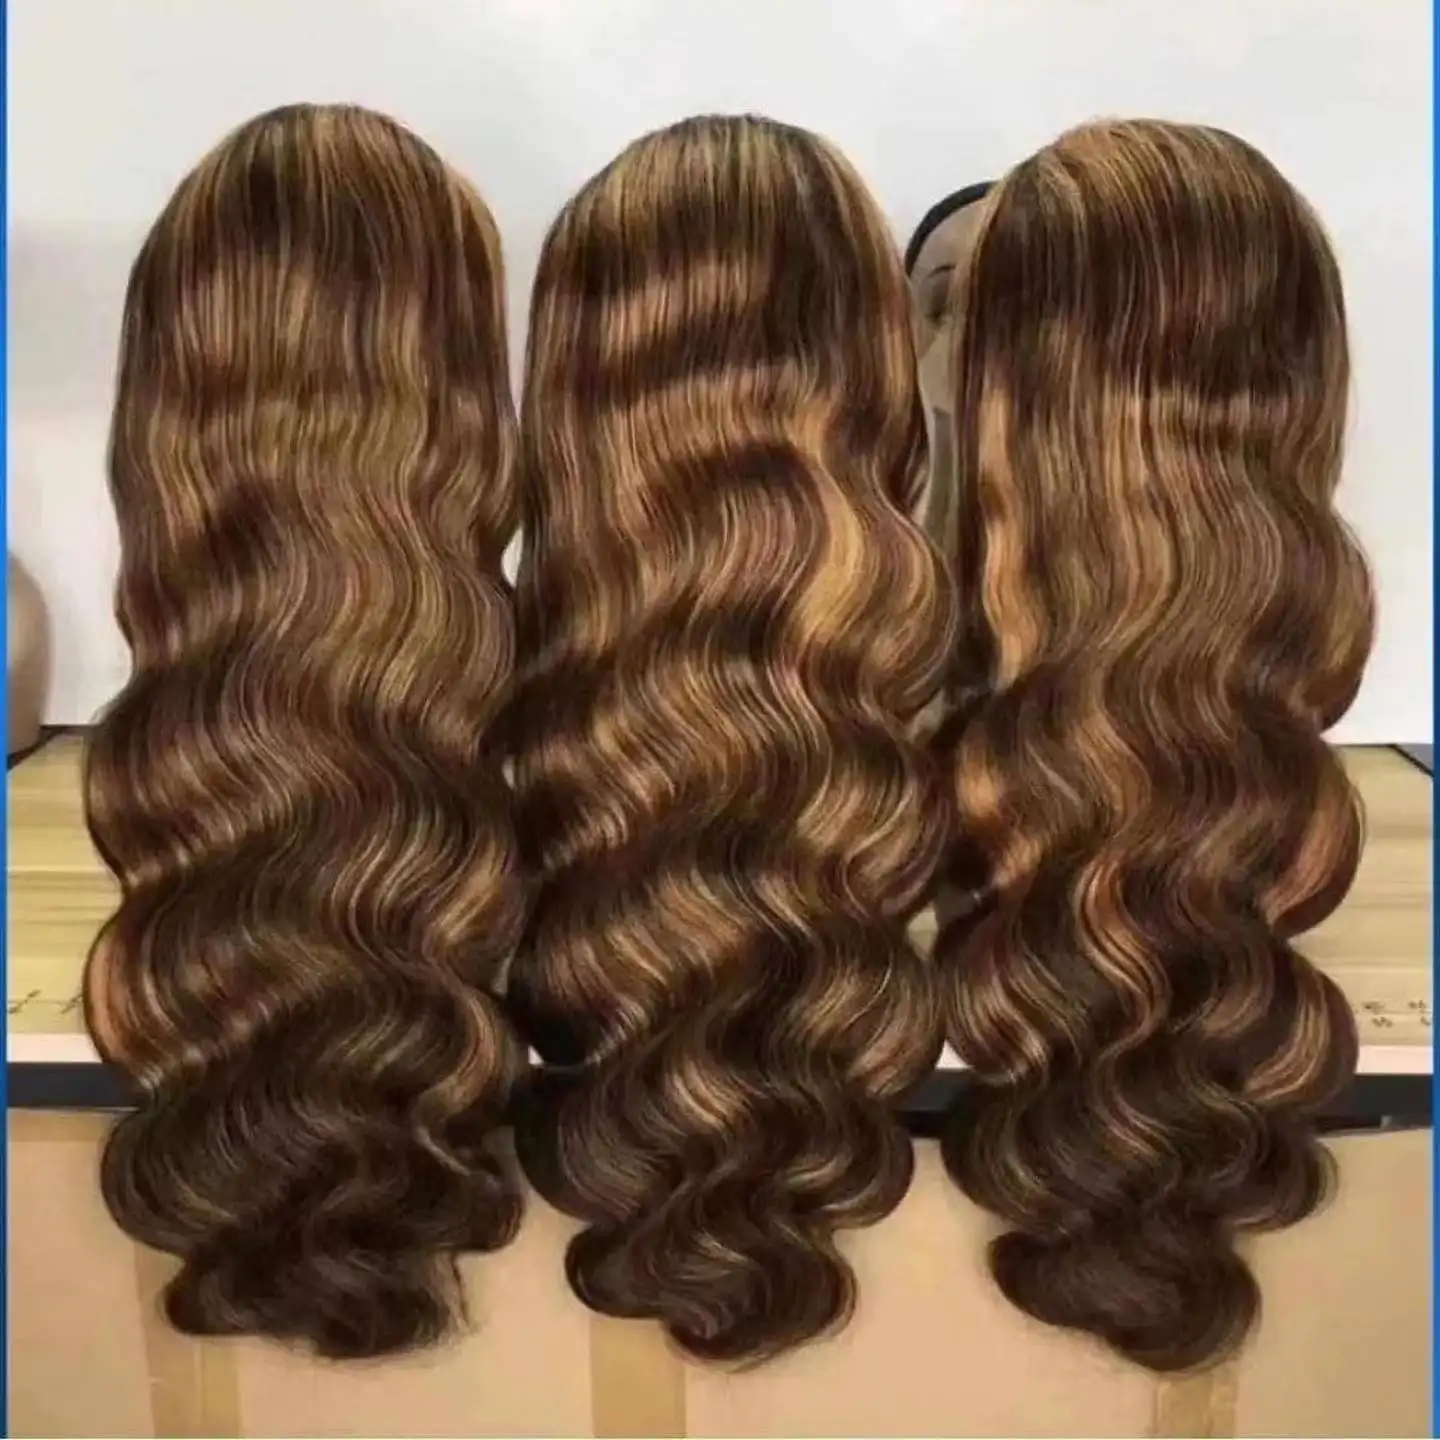 Cheap Price Transparent P4/27 Lace Front Wig,Ombre Brown 13*4 Lace Front 4/27 Wigs,Honey Blond Highlight 4/27 Human Hair Wig